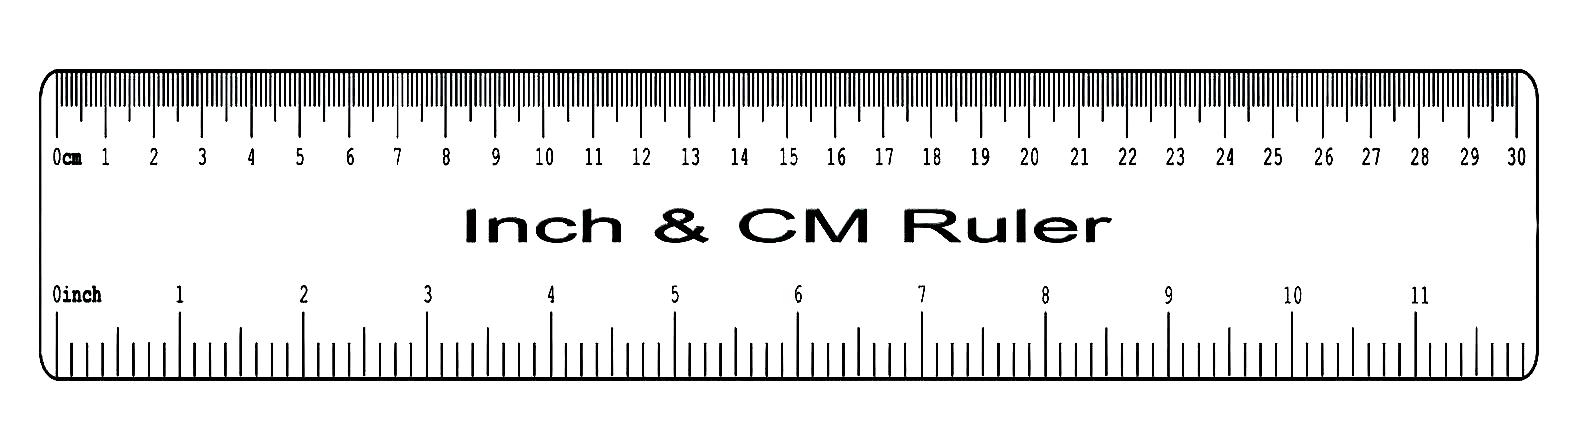 life size ruler online inches